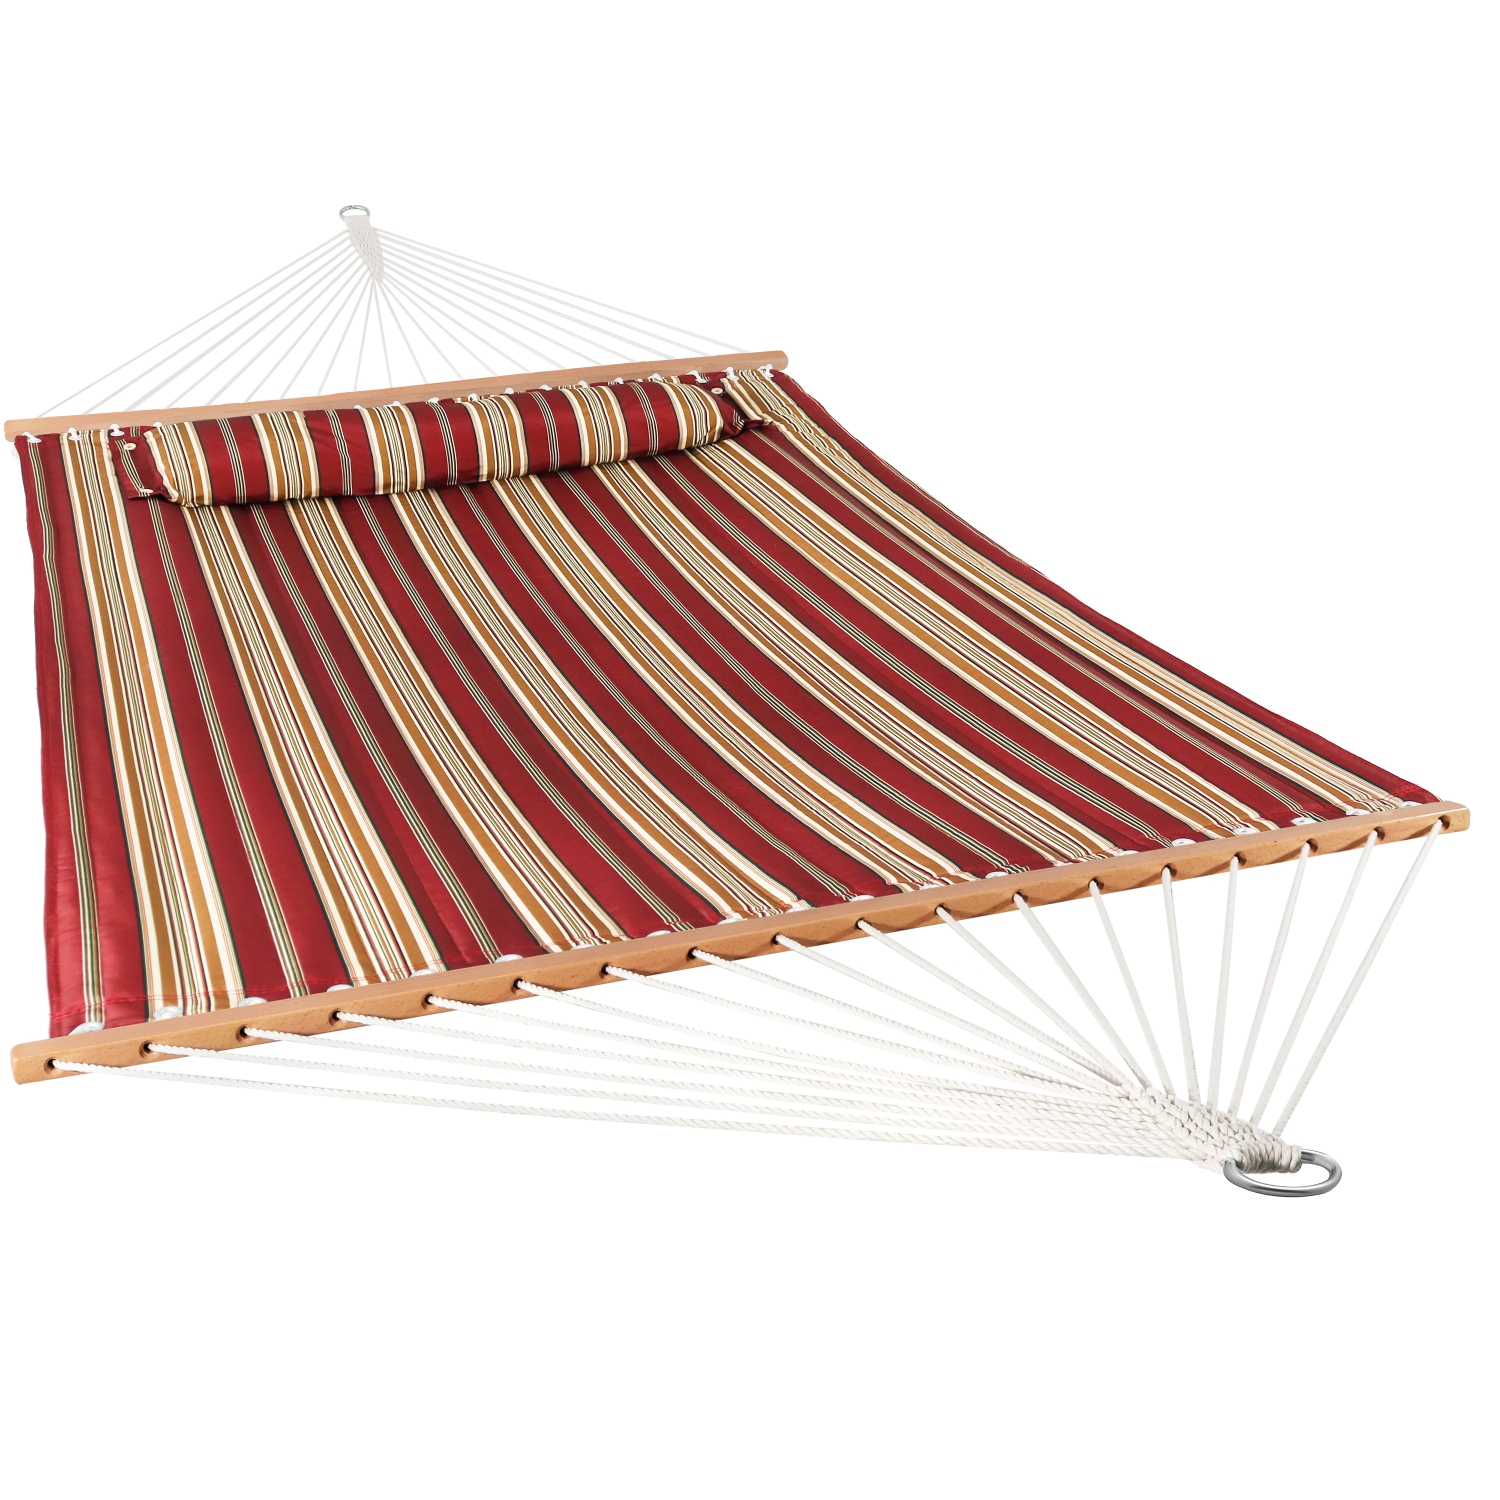 Sunnydaze Large Quilted Hammock with Spreader Bar and Pillow - Red Stripe